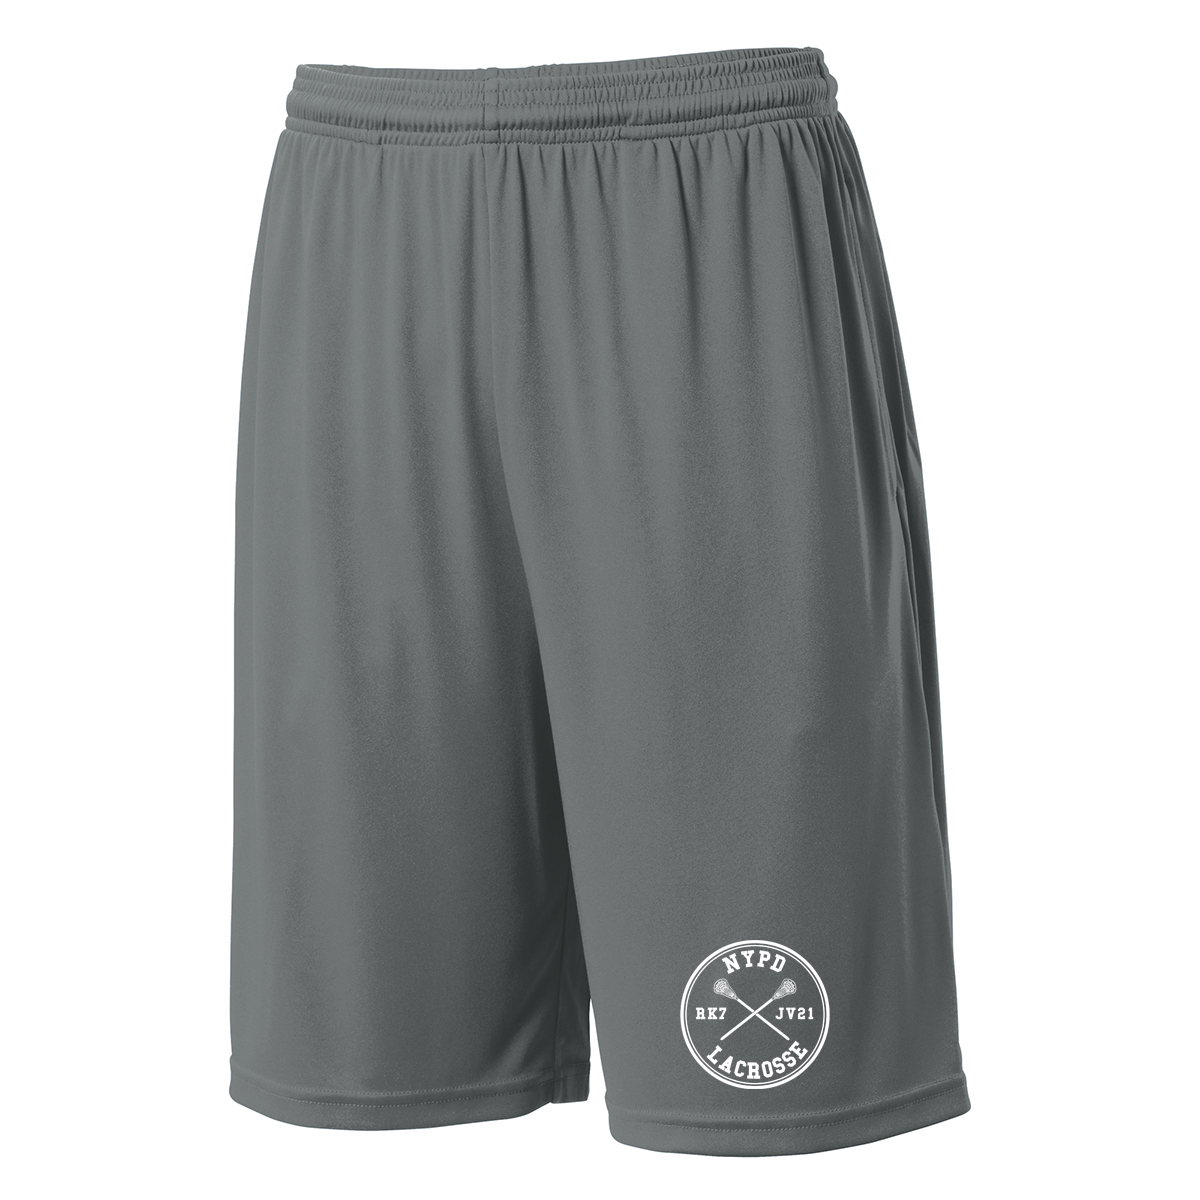 NYPD Lacrosse Shorts